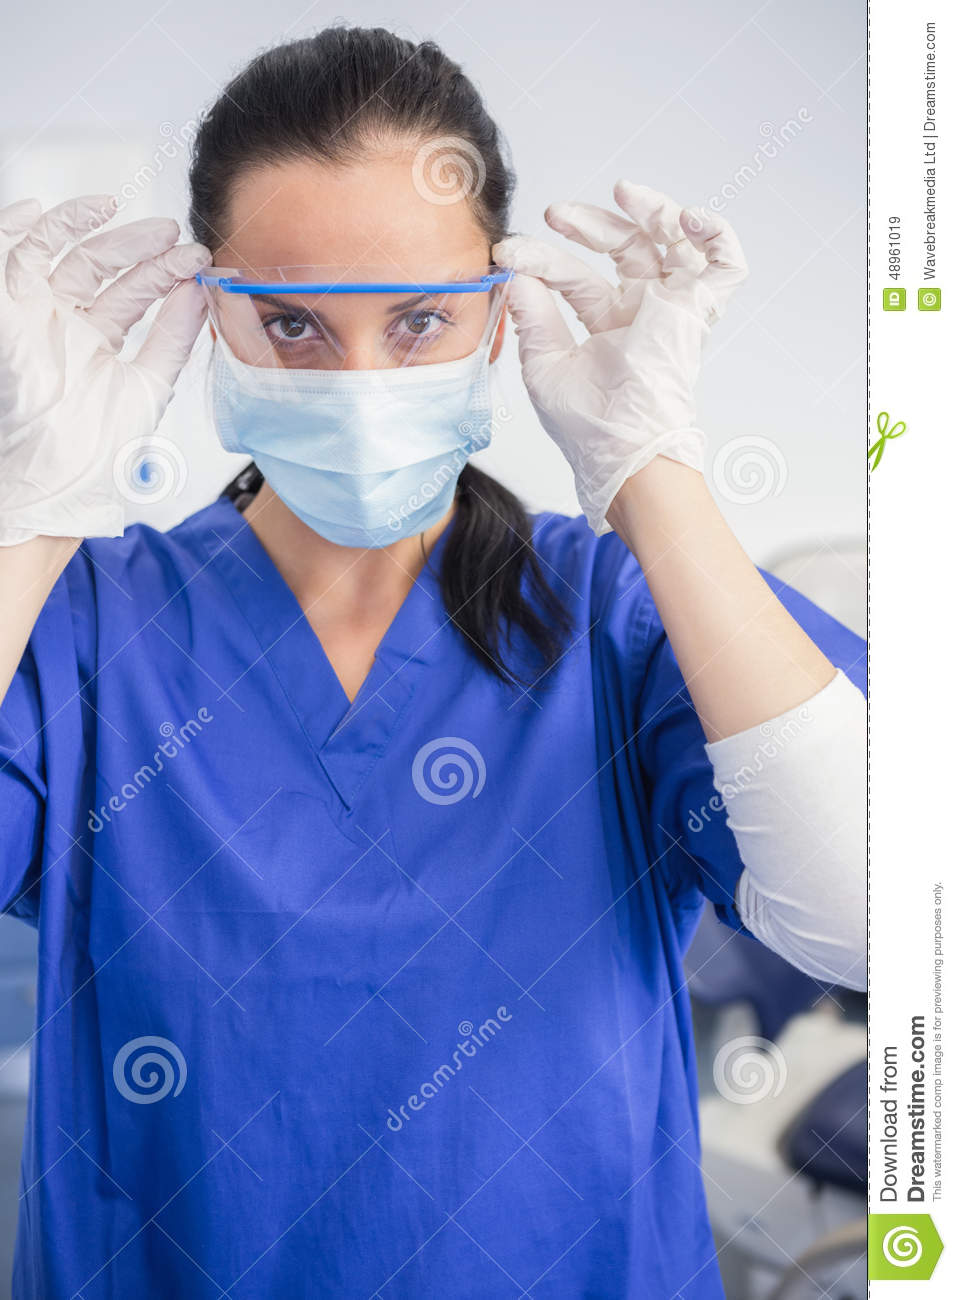 Dentist With Surgical Mask Putting On Her Safety Glasses Stock Photo